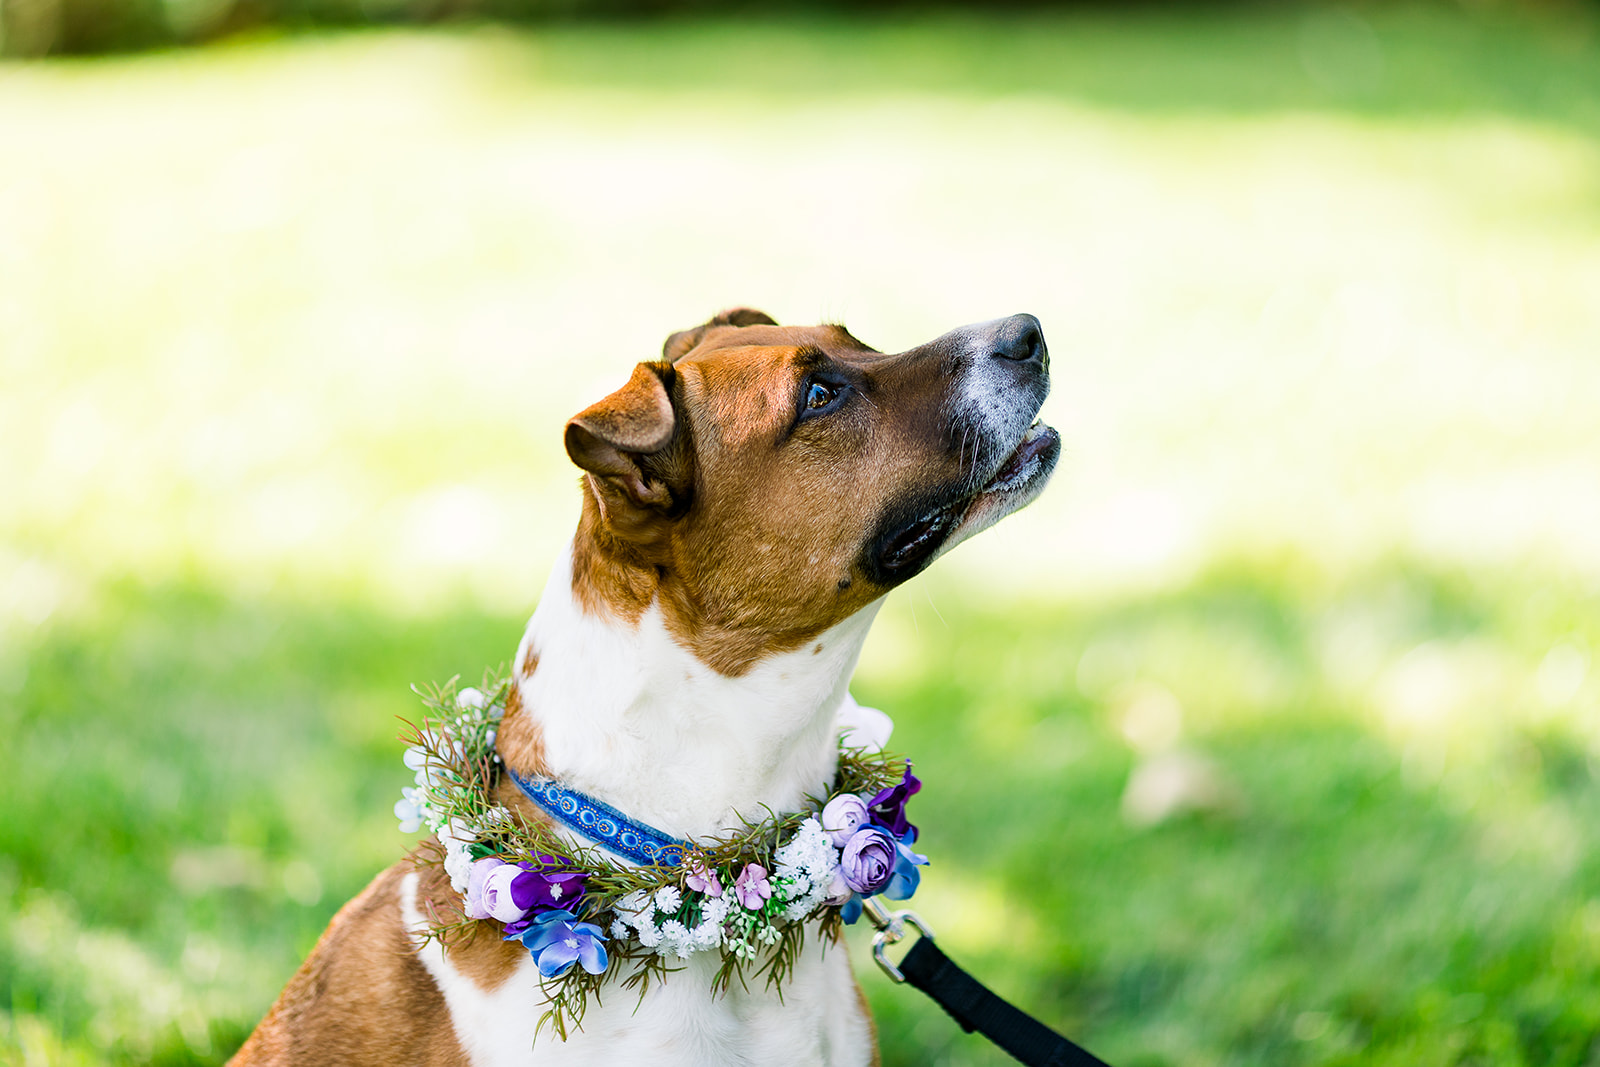 Adorable dog Brandi, adorned with a flower crown, joins the couple in a heartwarming ceremony moment